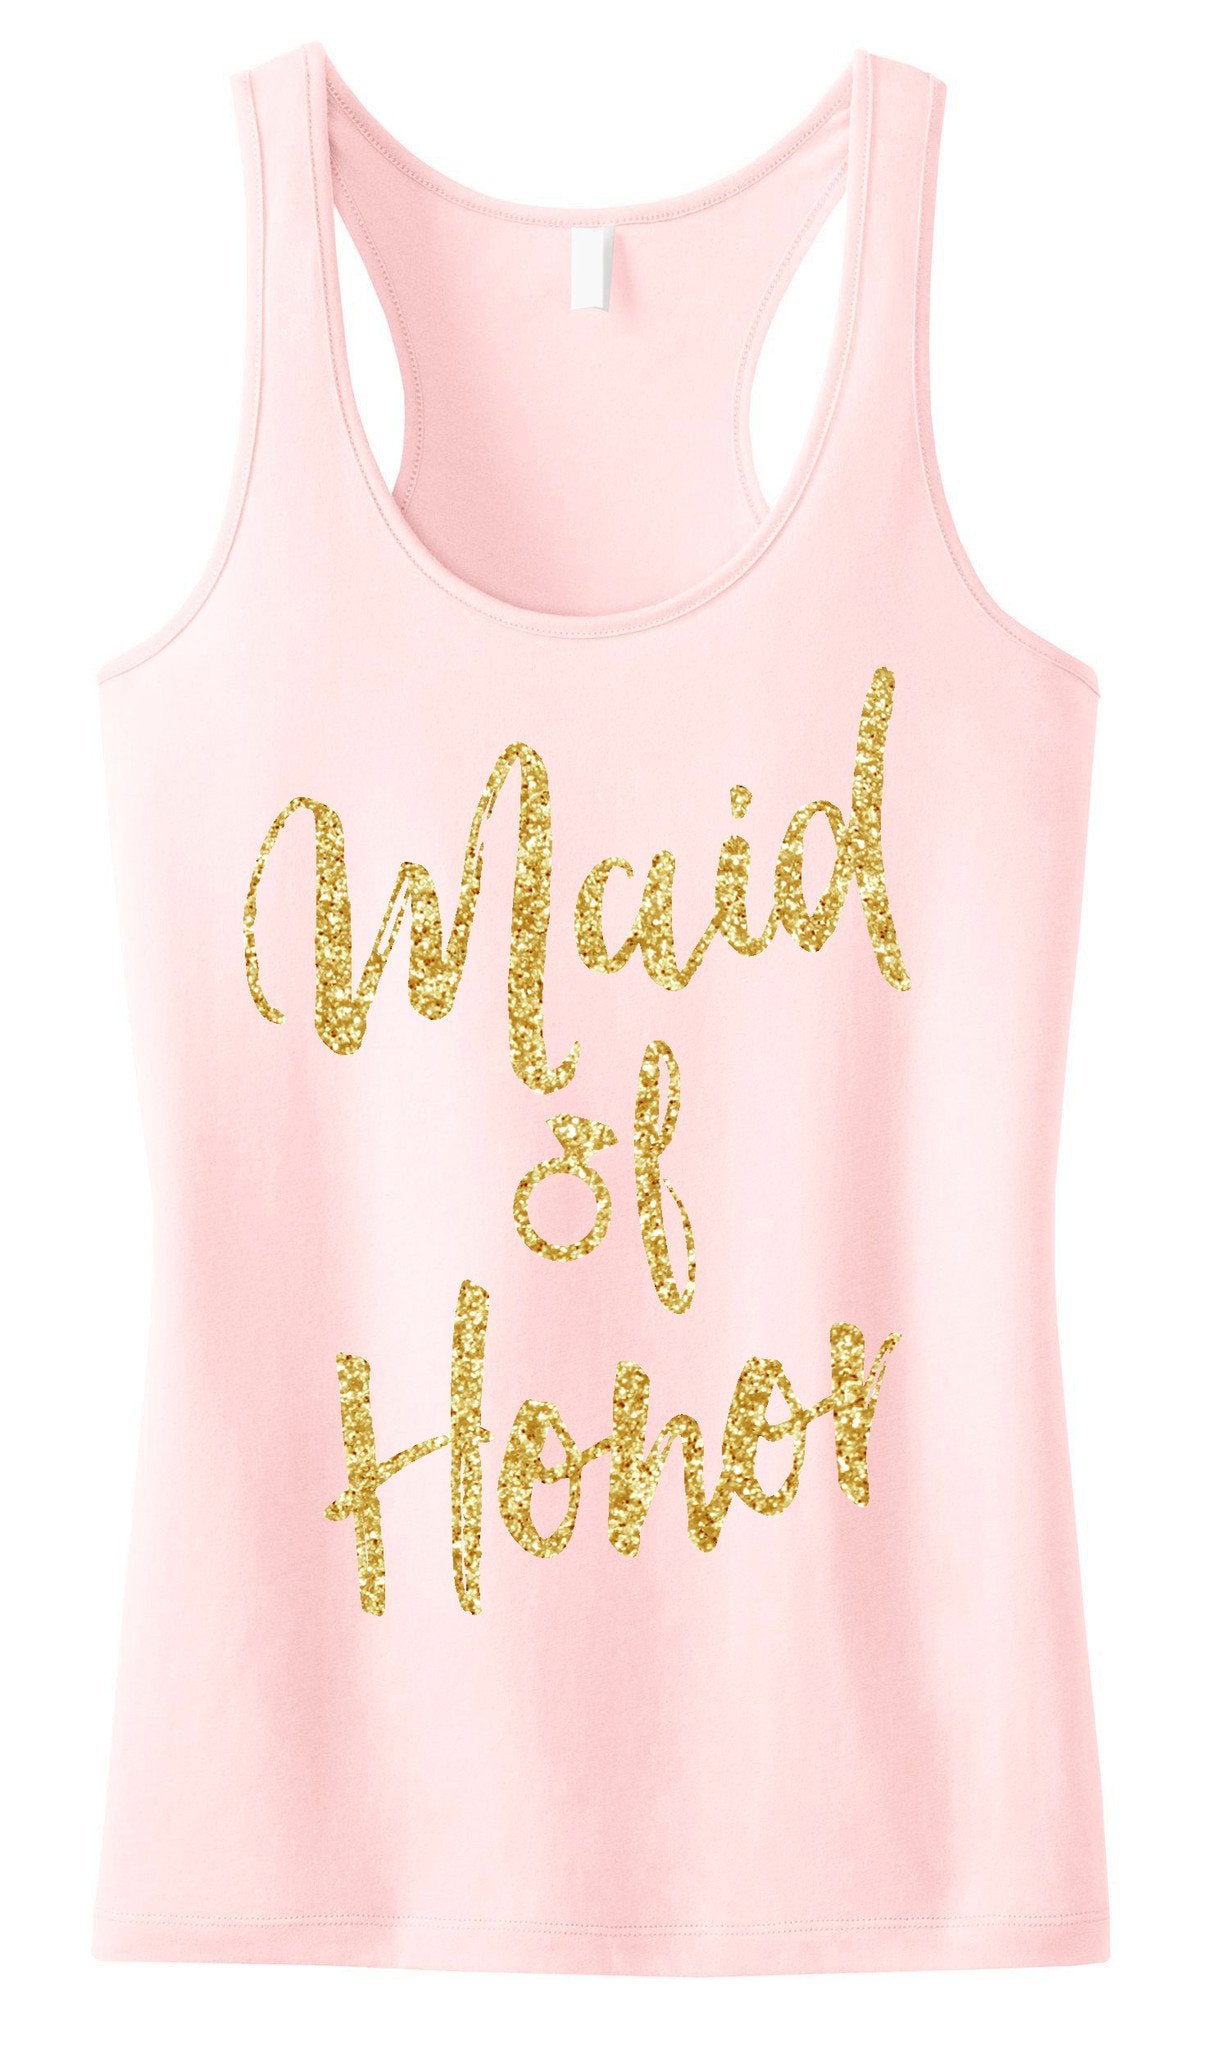 Maid of Honor Tank Top with Gold Glitter -